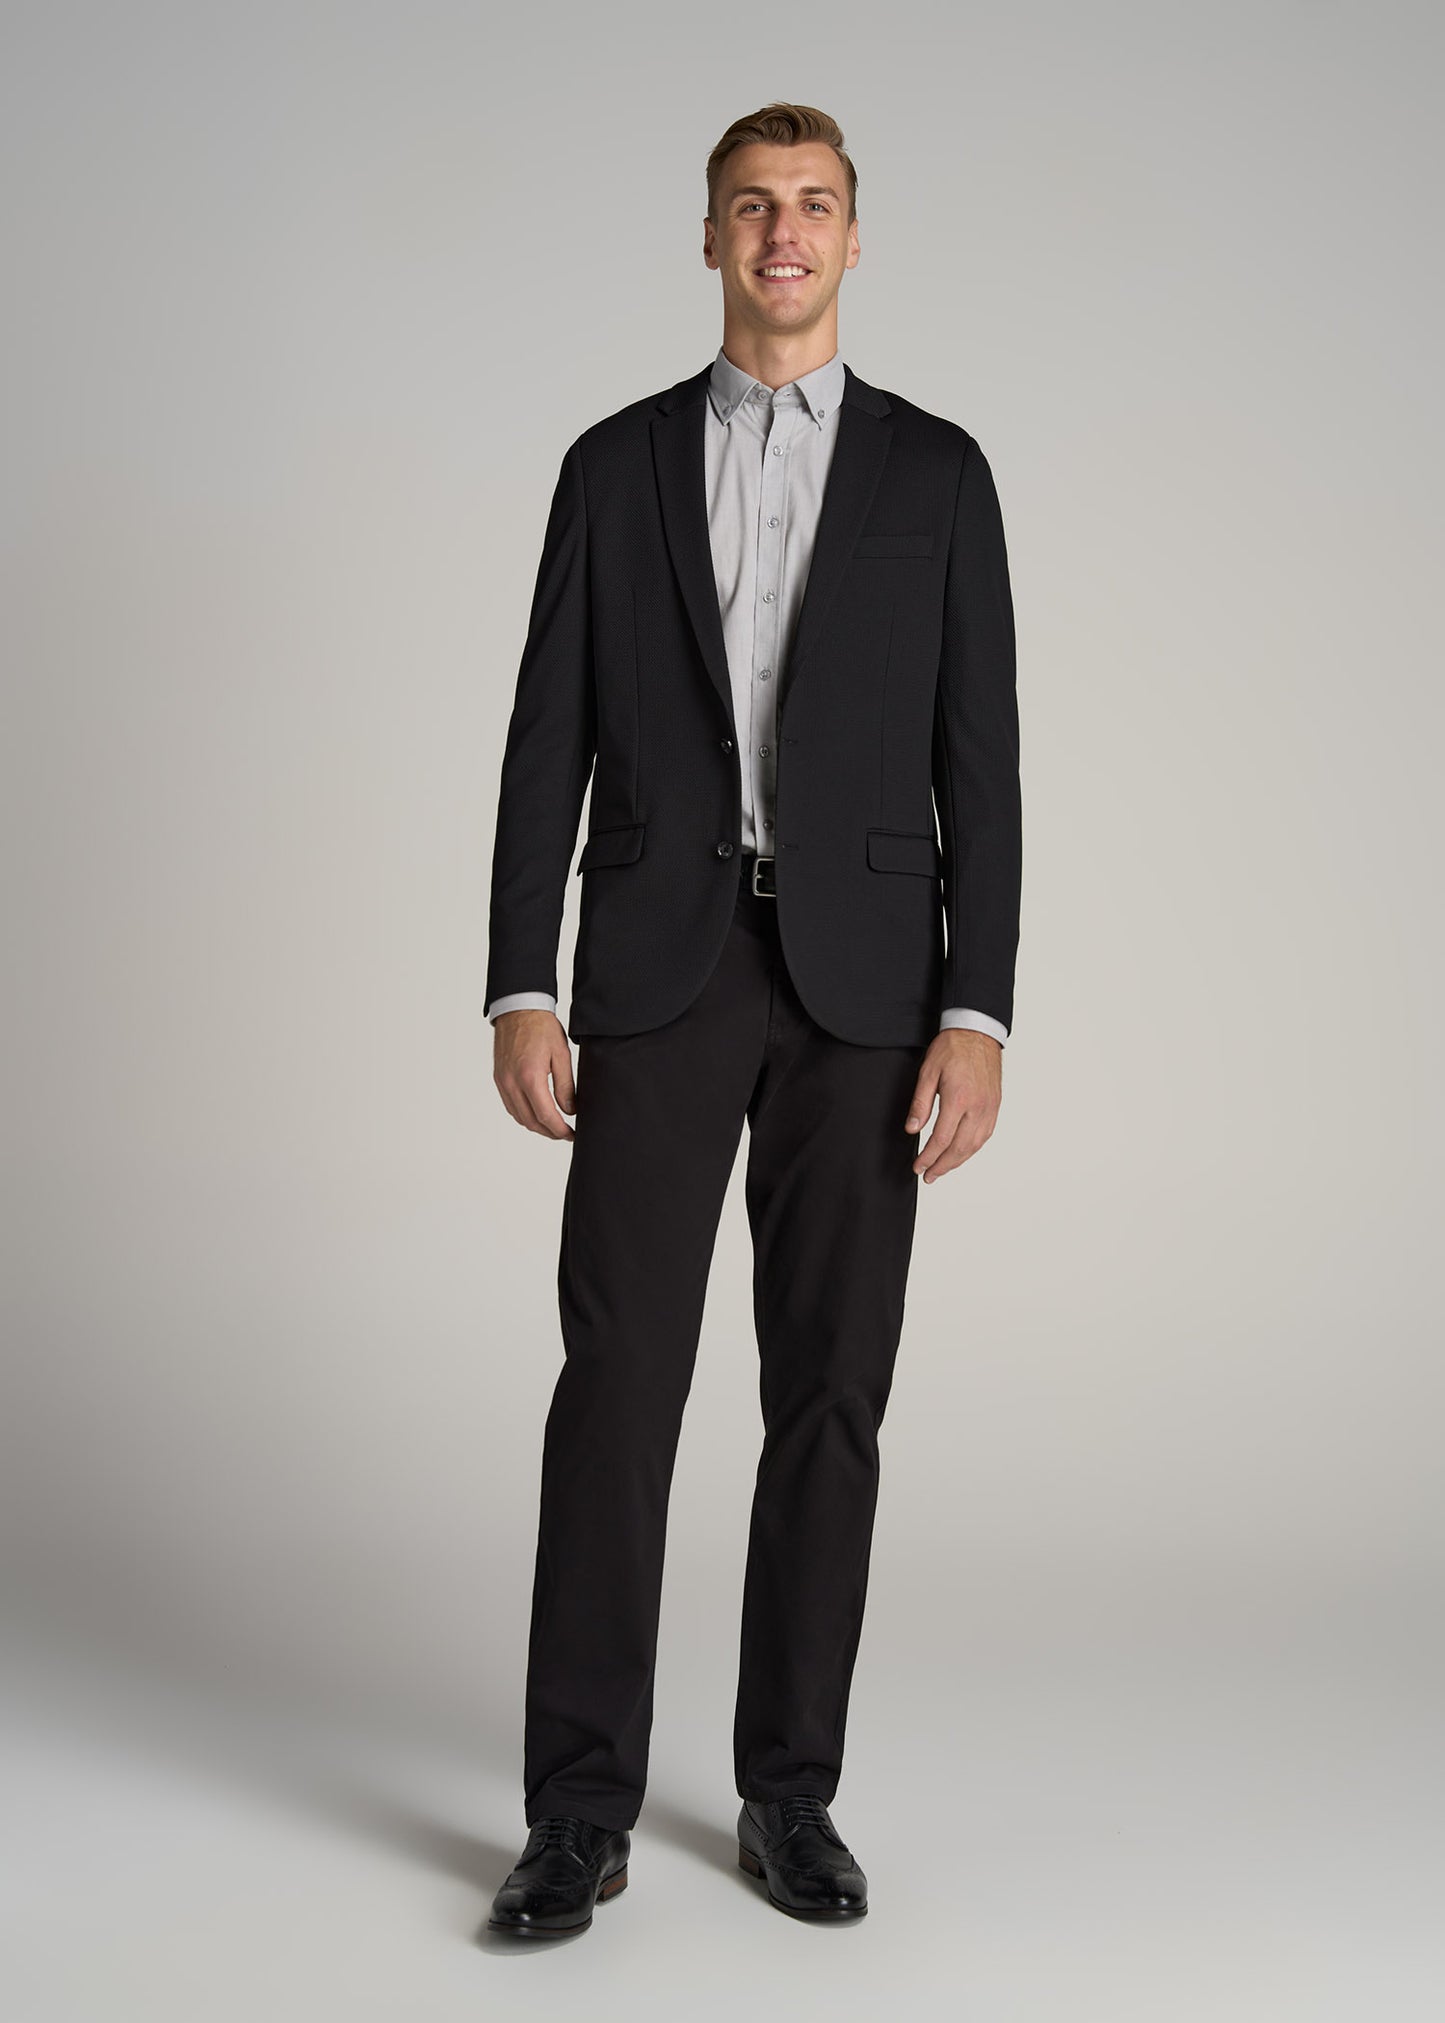 A tall man wearing Textured Blazer for Tall Men in Black from American Tall